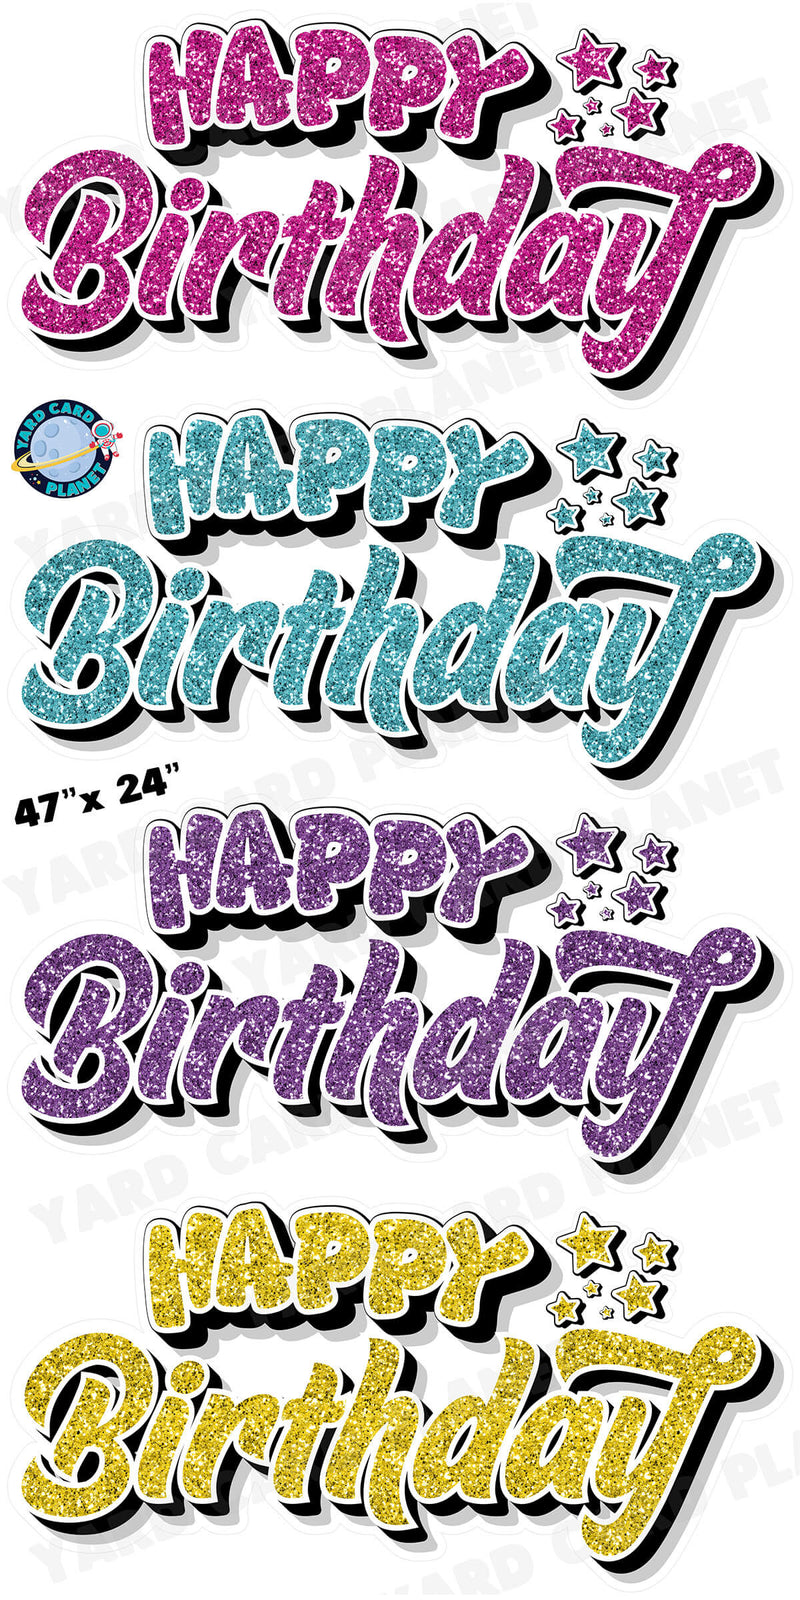 Happy Birthday EZ Quick Signs in Glitter Hot Pink, Teal, Purple and Yellow Yard Card Set with Measurements